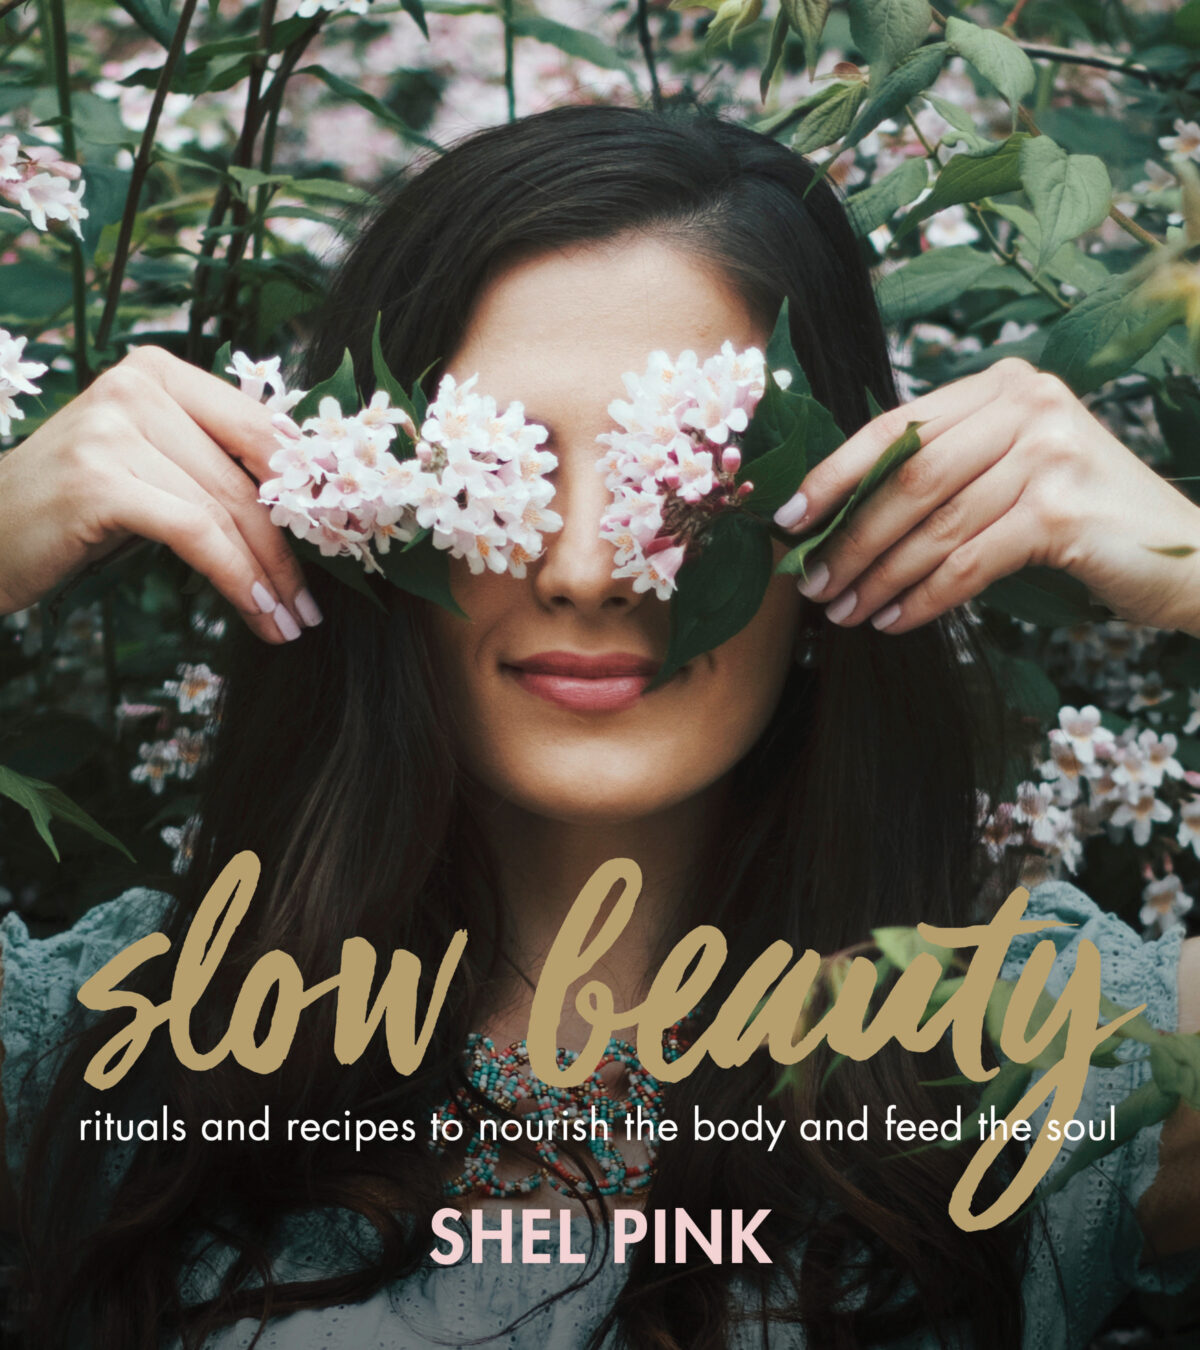 Slow Beauty book cover (Mediacraft)